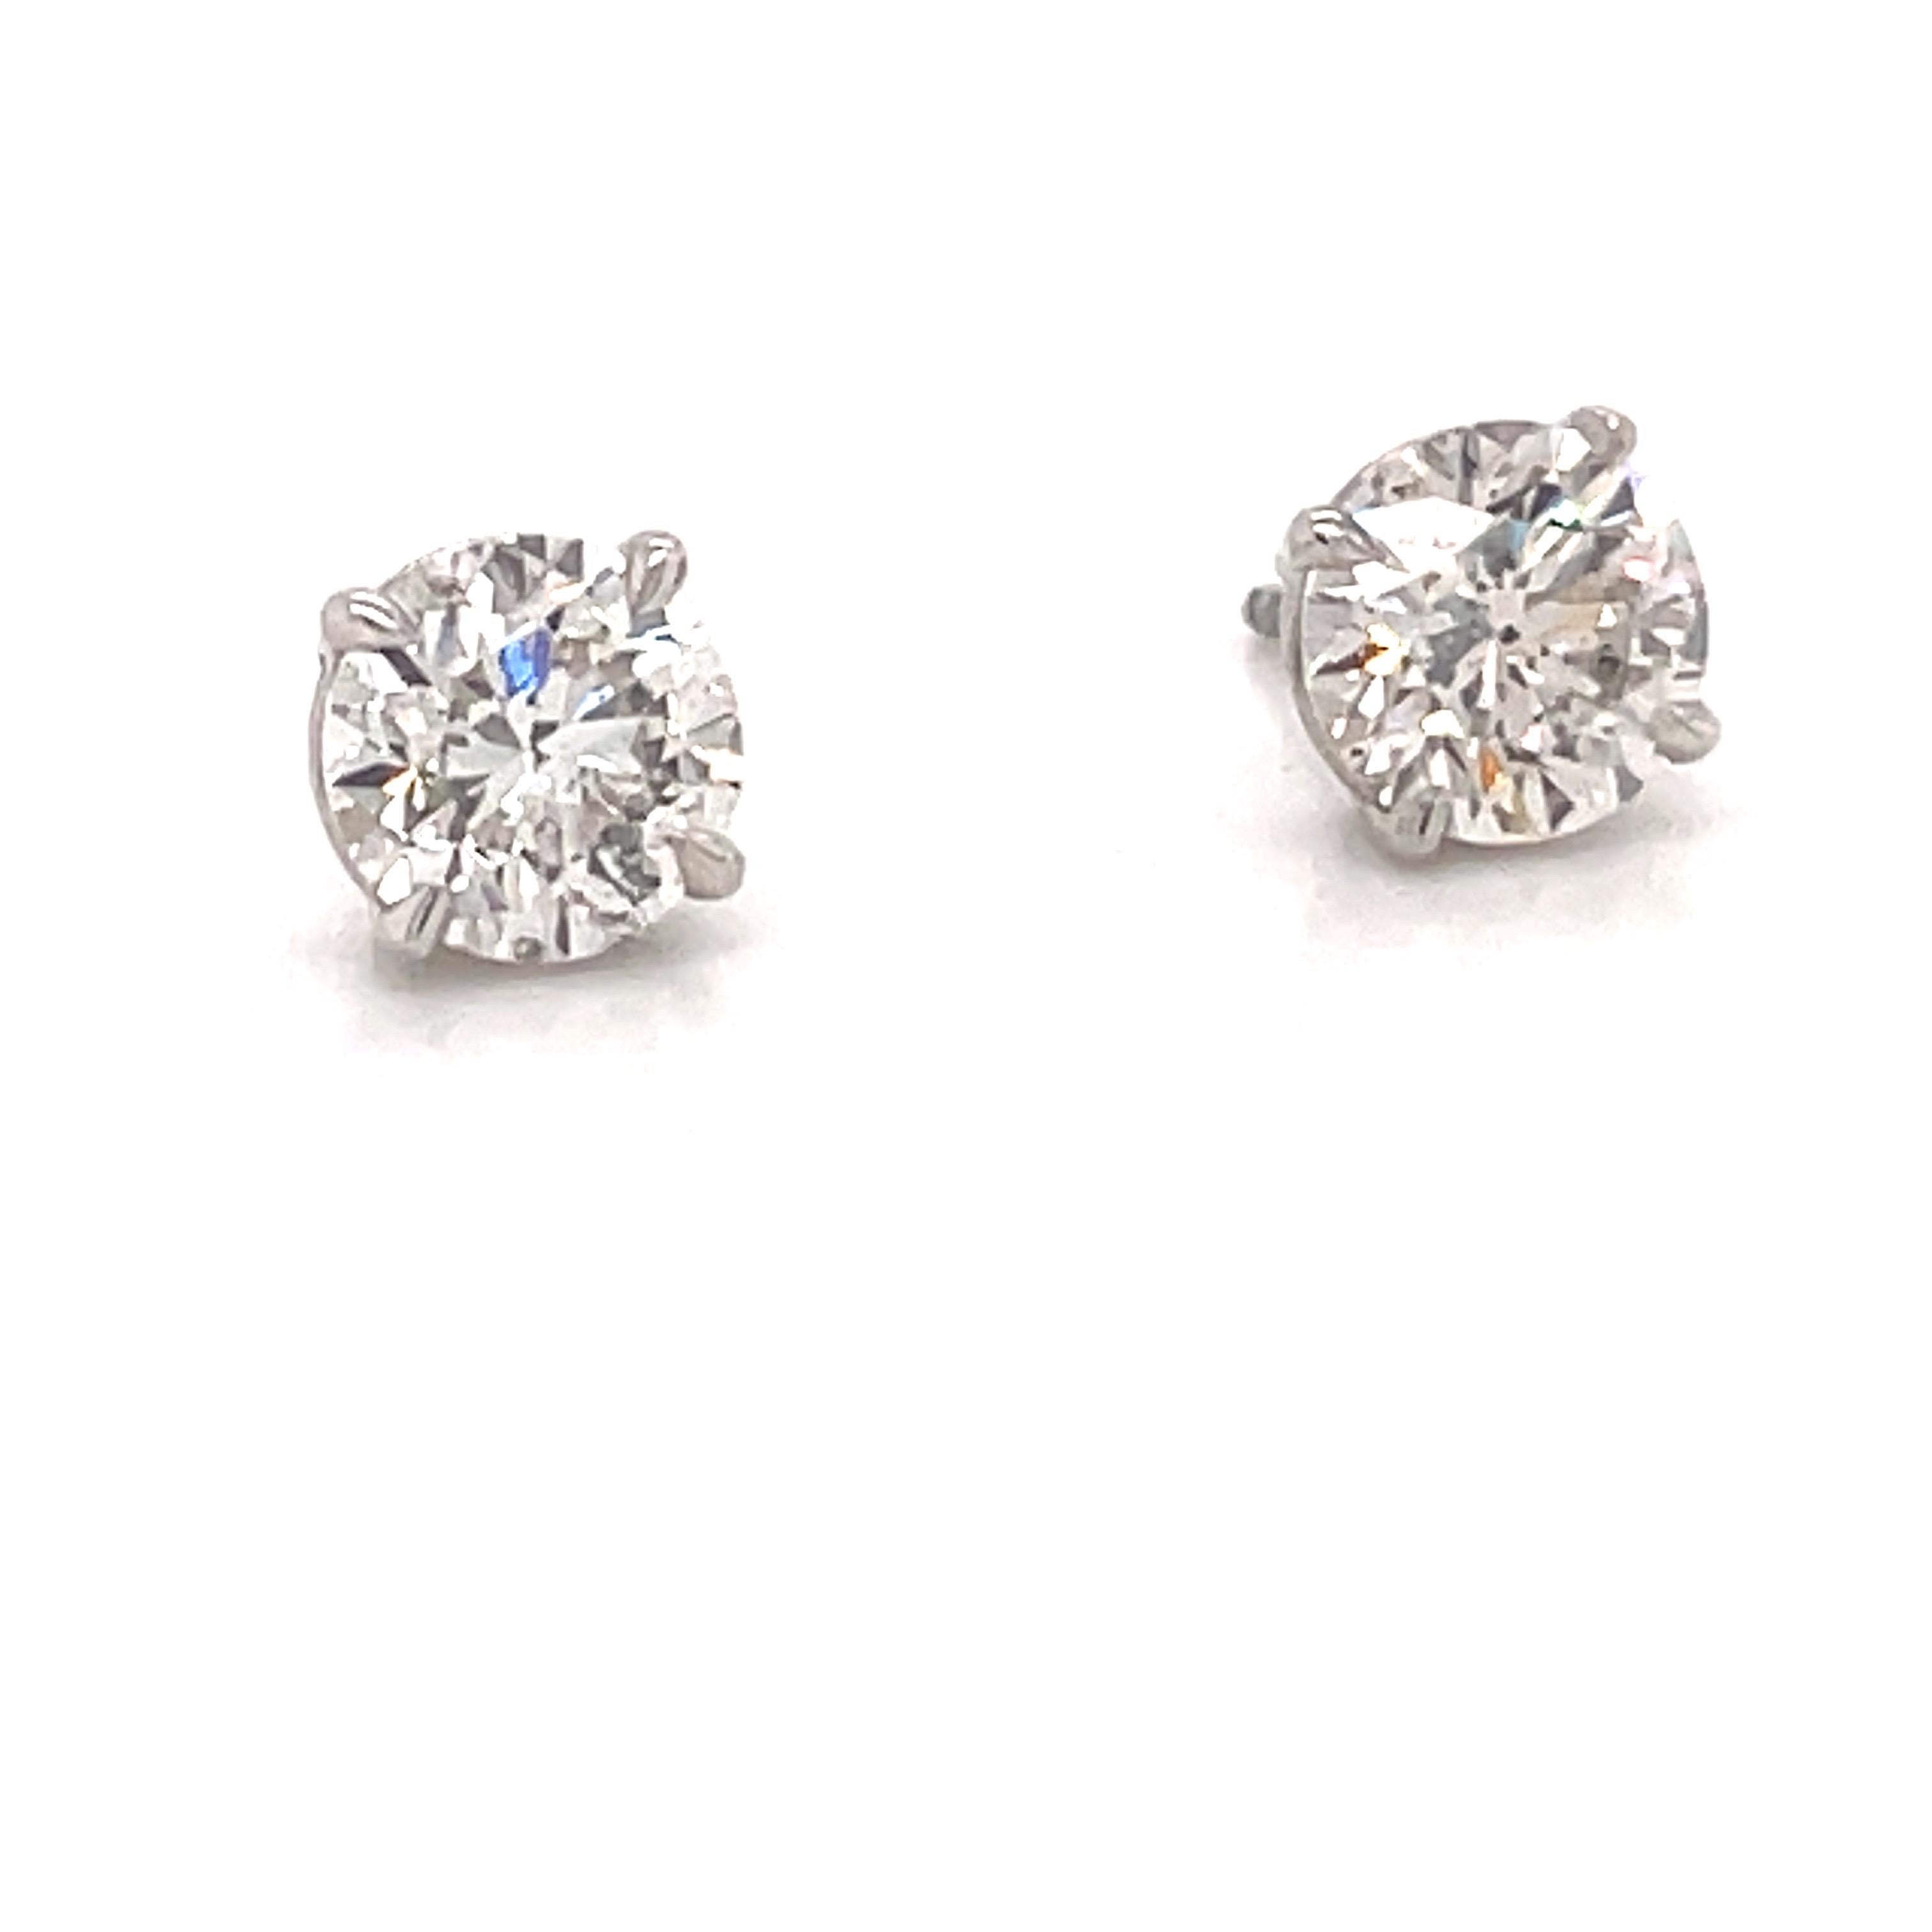 Diamond stud earrings weighing 2.04 carats in a 4 prong champagne setting, 14k white gold. 
Color I
Clarity SI3-I1